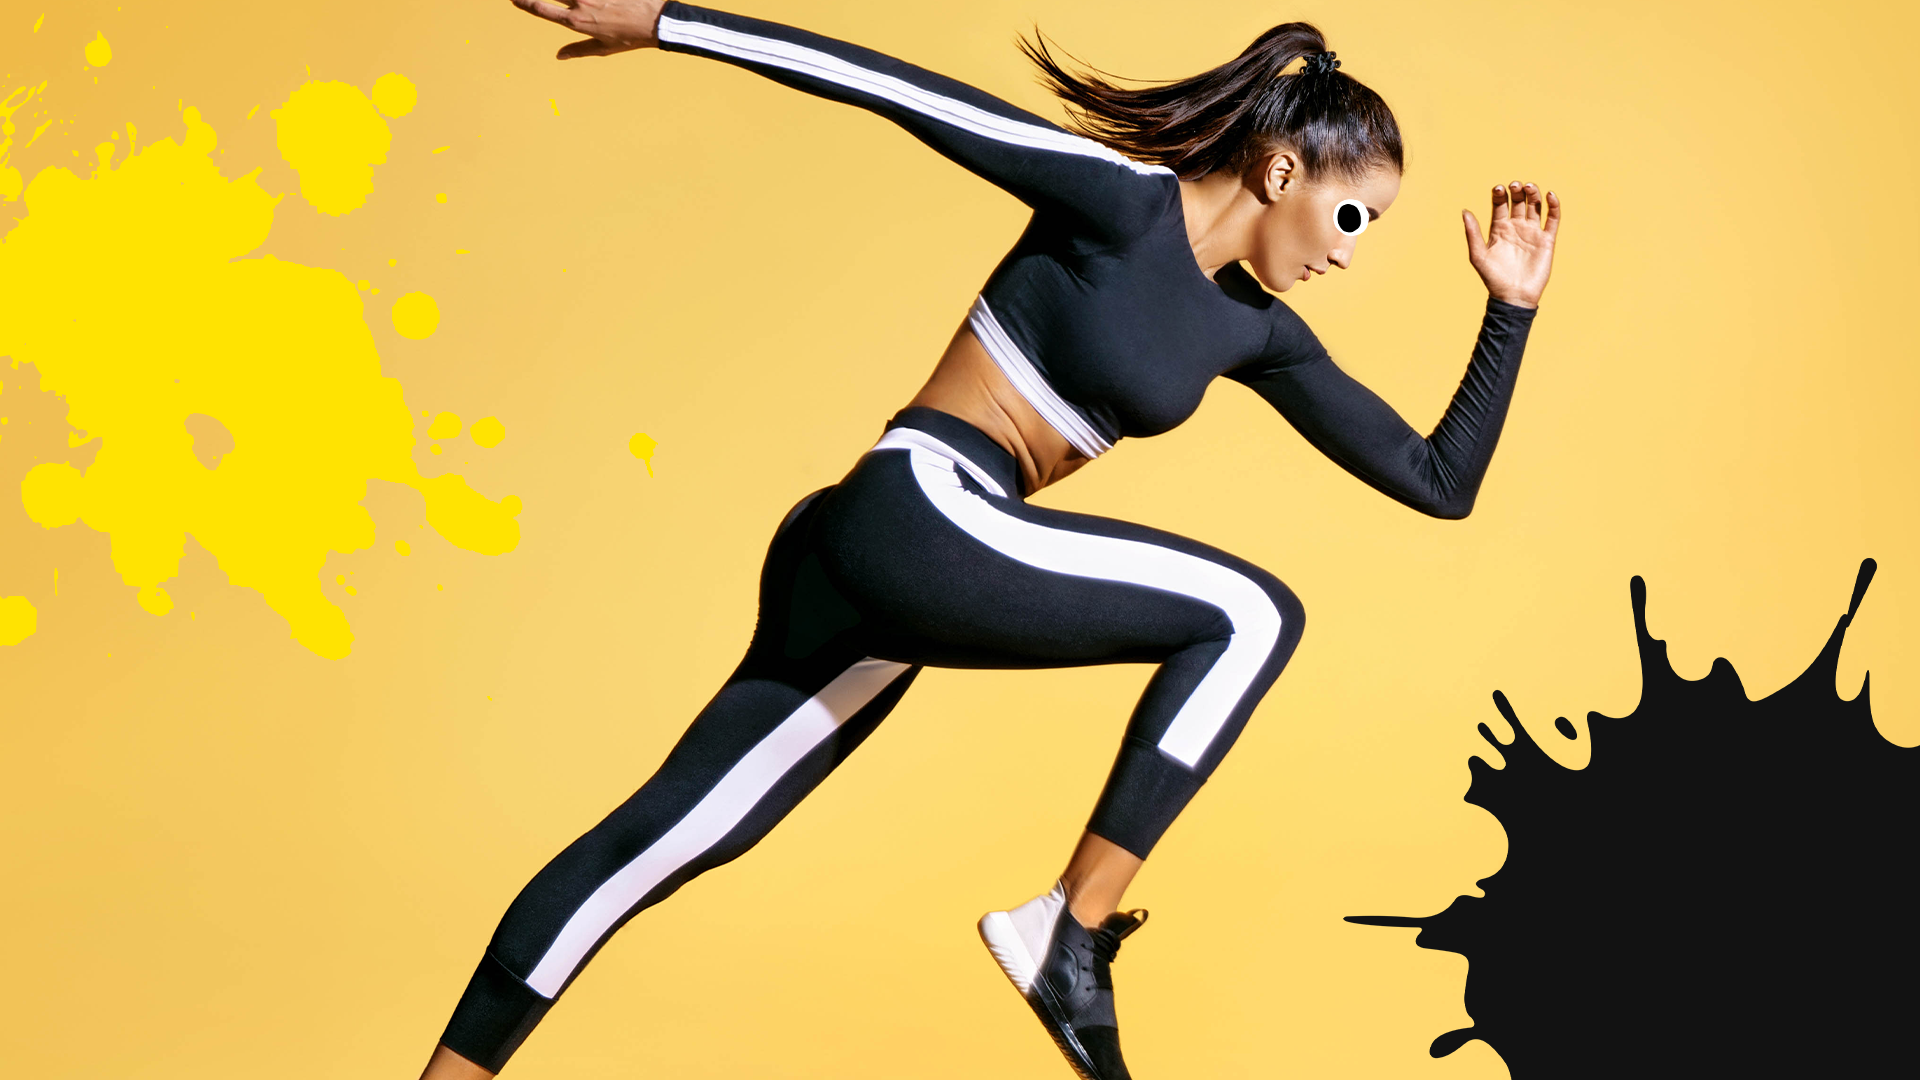 Woman running on yellow background with splats 